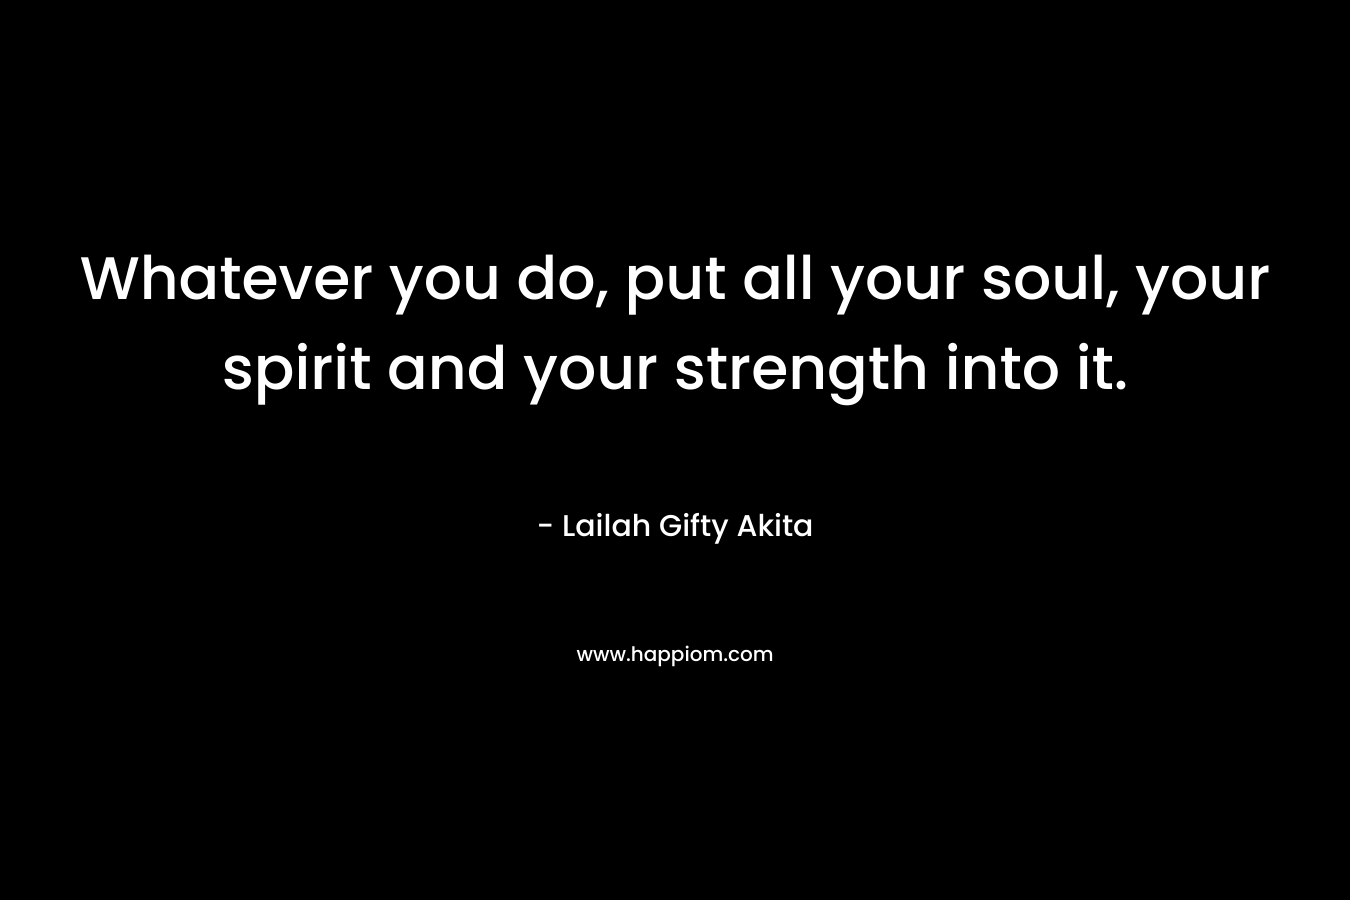 Whatever you do, put all your soul, your spirit and your strength into it.